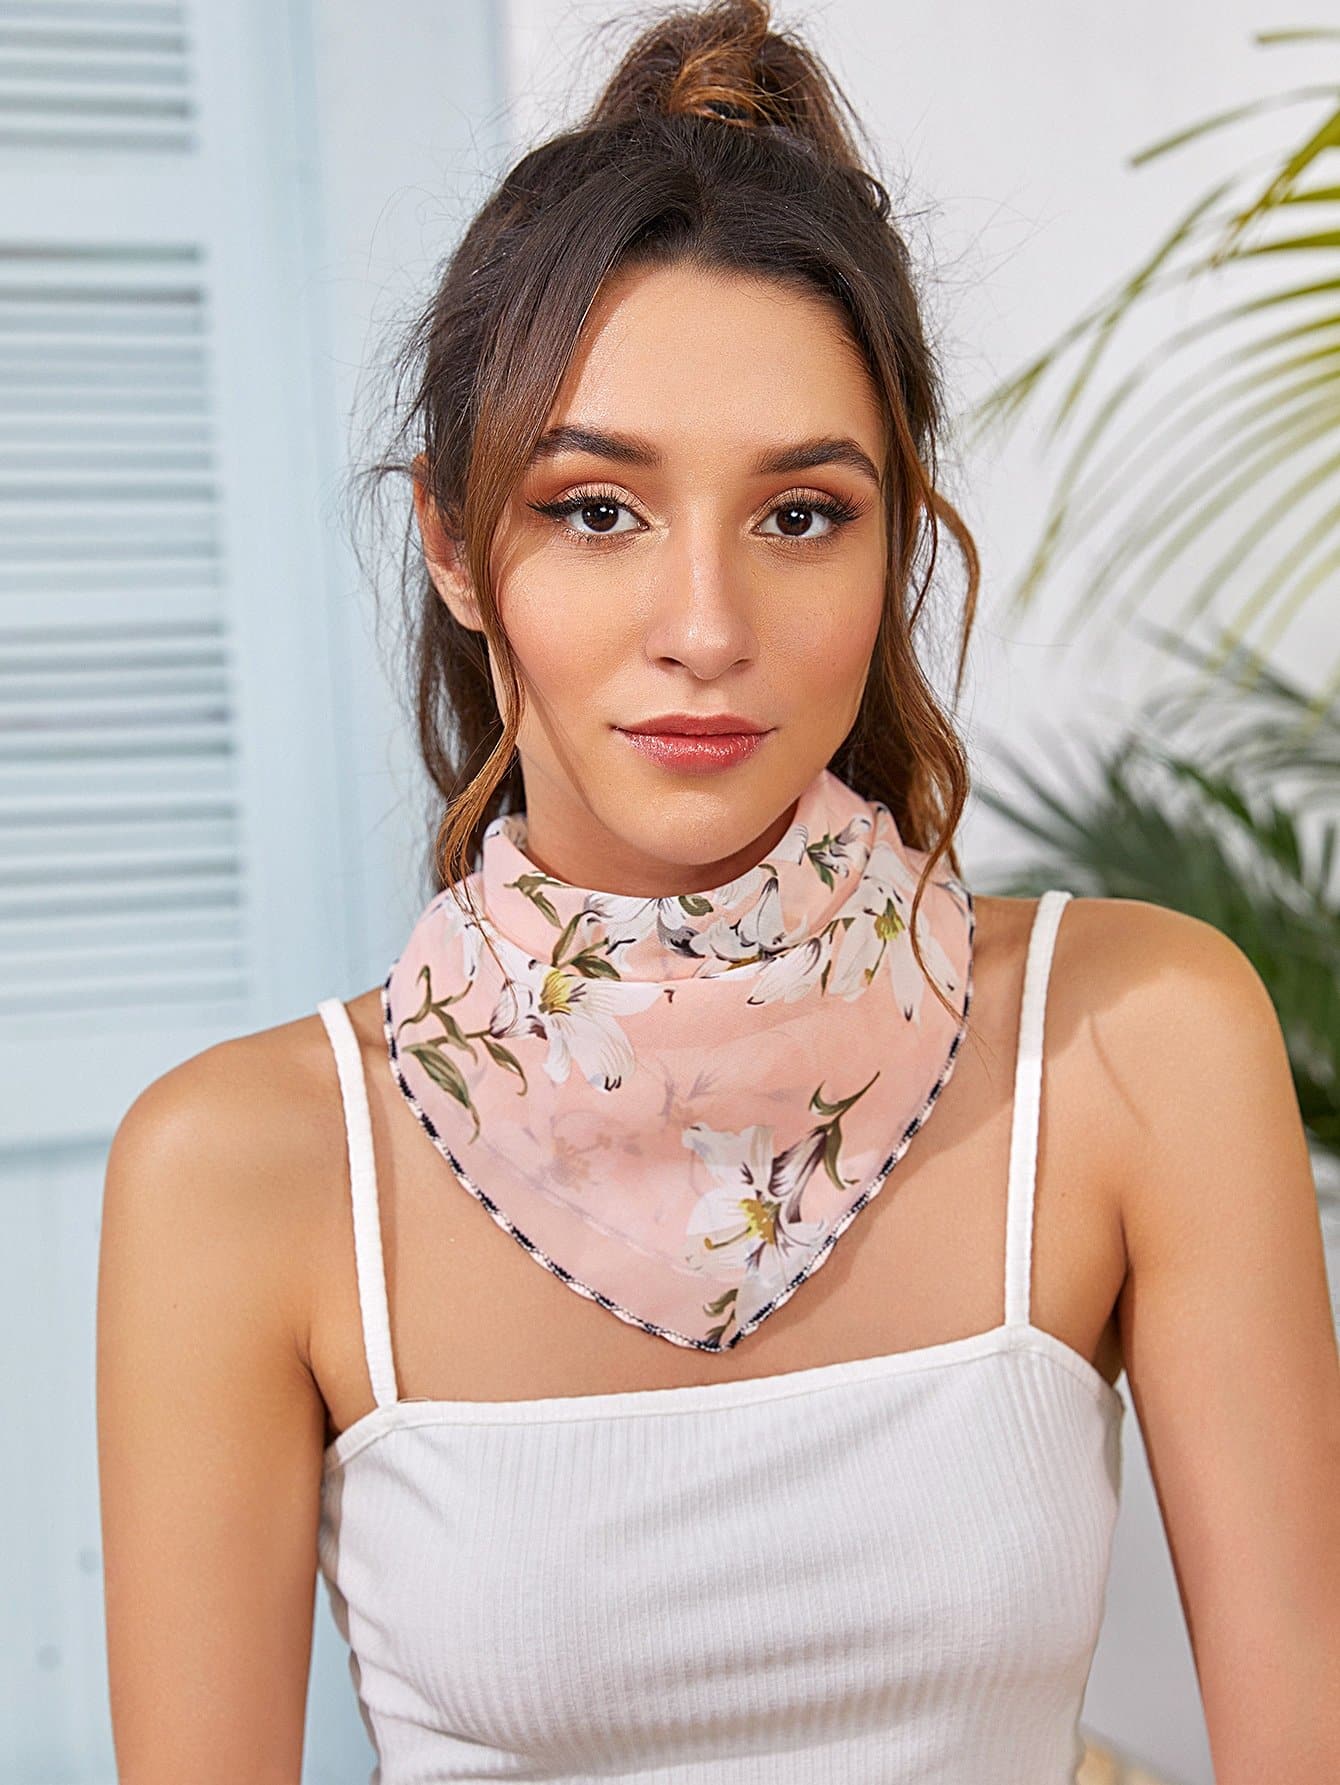 Floral Pattern Face Protection Mask Scarf